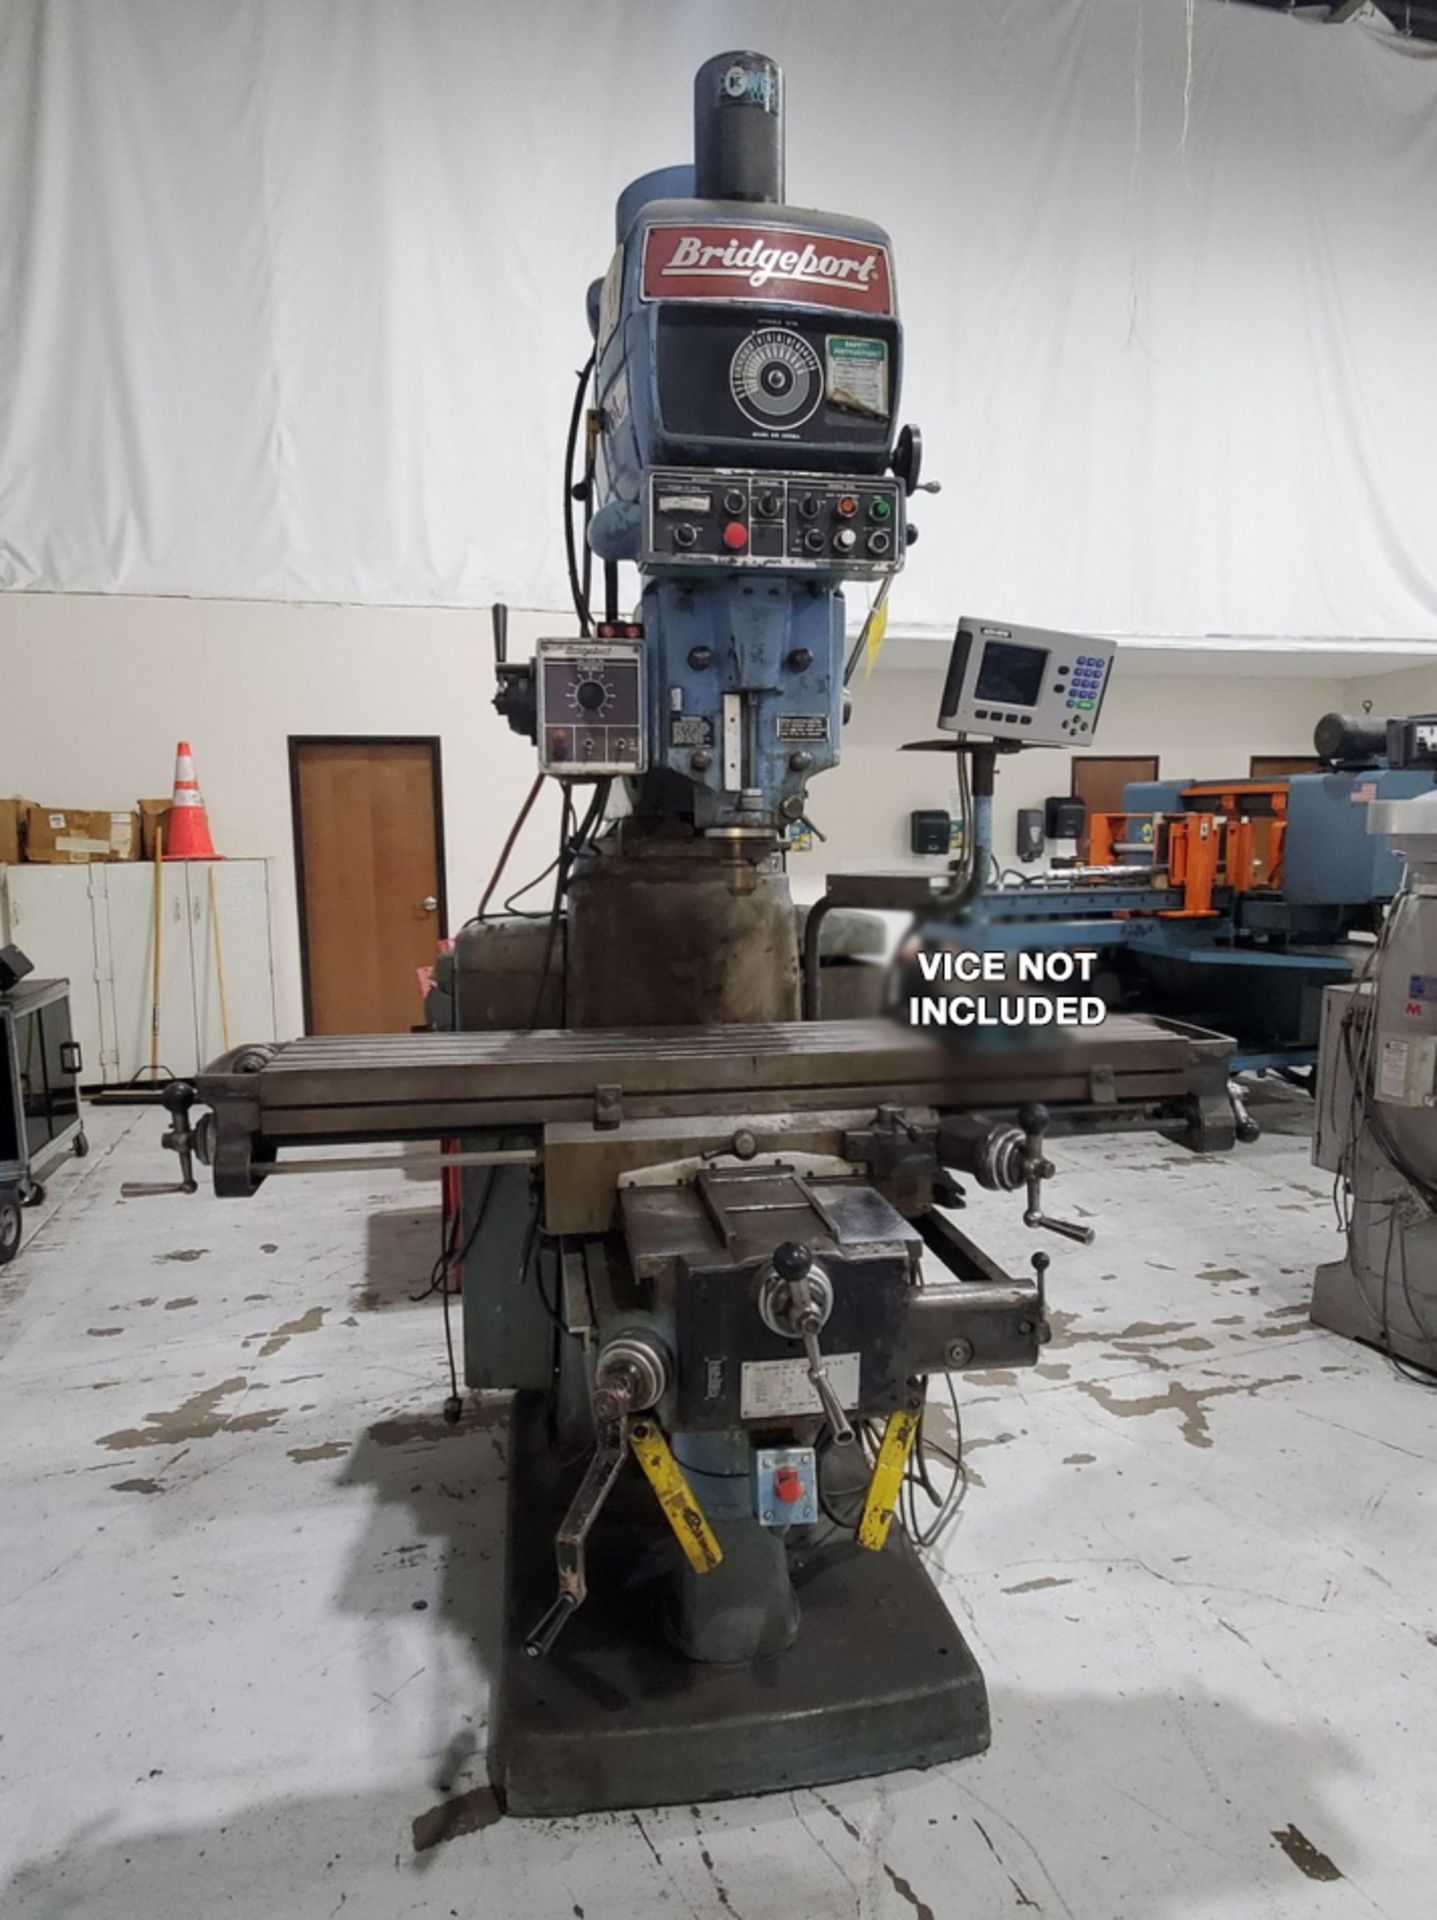 Bridgeport Vertical Milling Machine 4-Axis, 460v, 3PH, 60HZ, 15A, VICE NOT INCLUDED